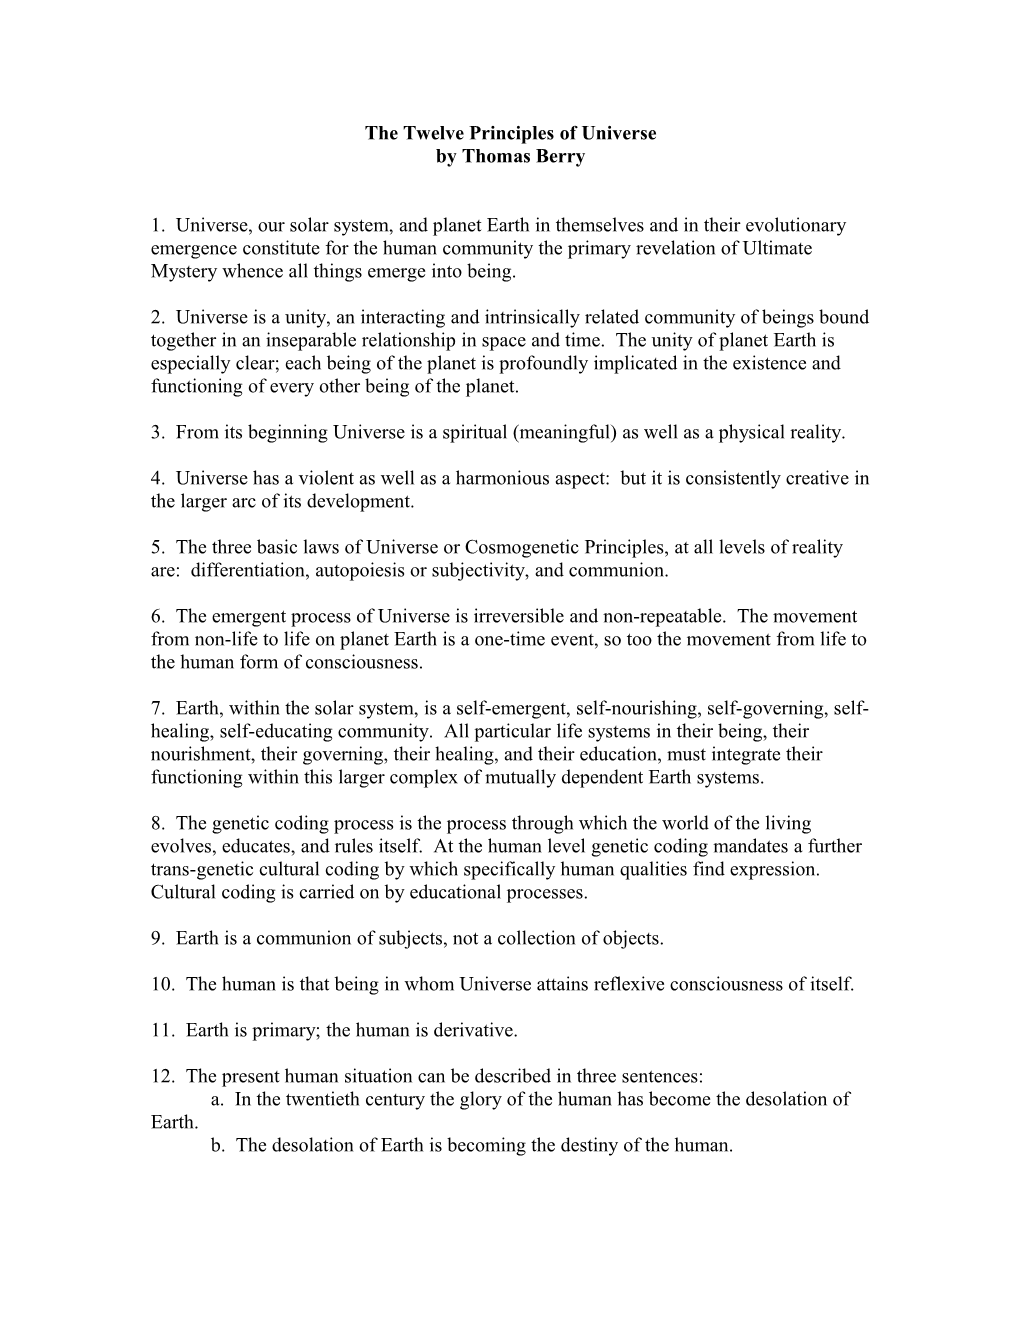 The Twelve Principles of the Universe